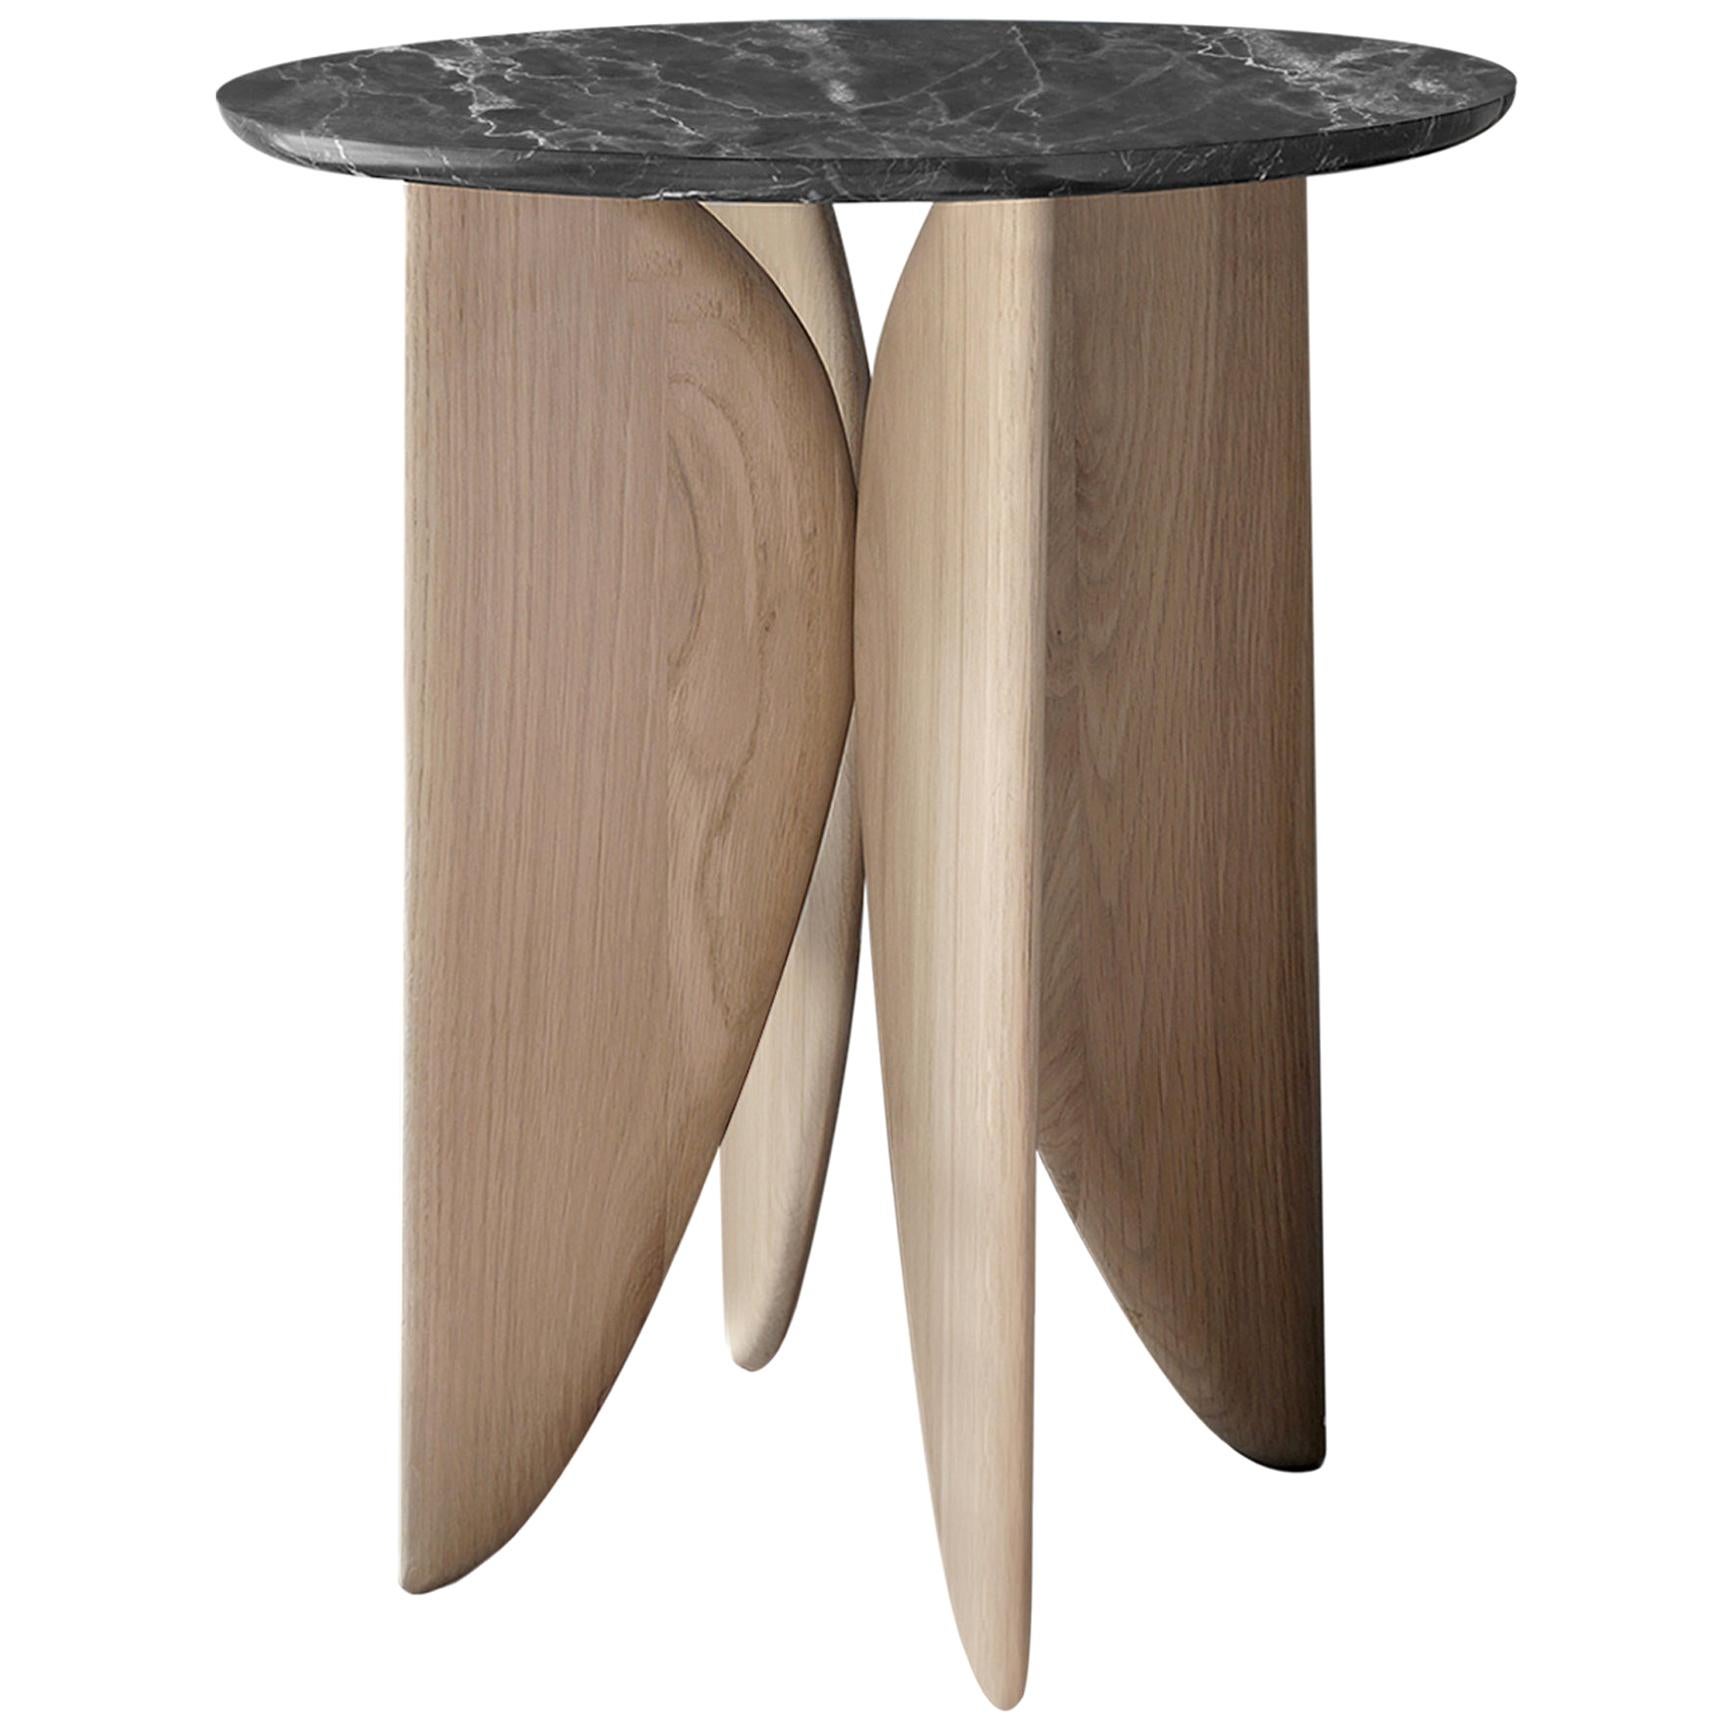 Noviembre VI Side Table, Night Stand in Oak Wood and Marble Top by Joel Escalona